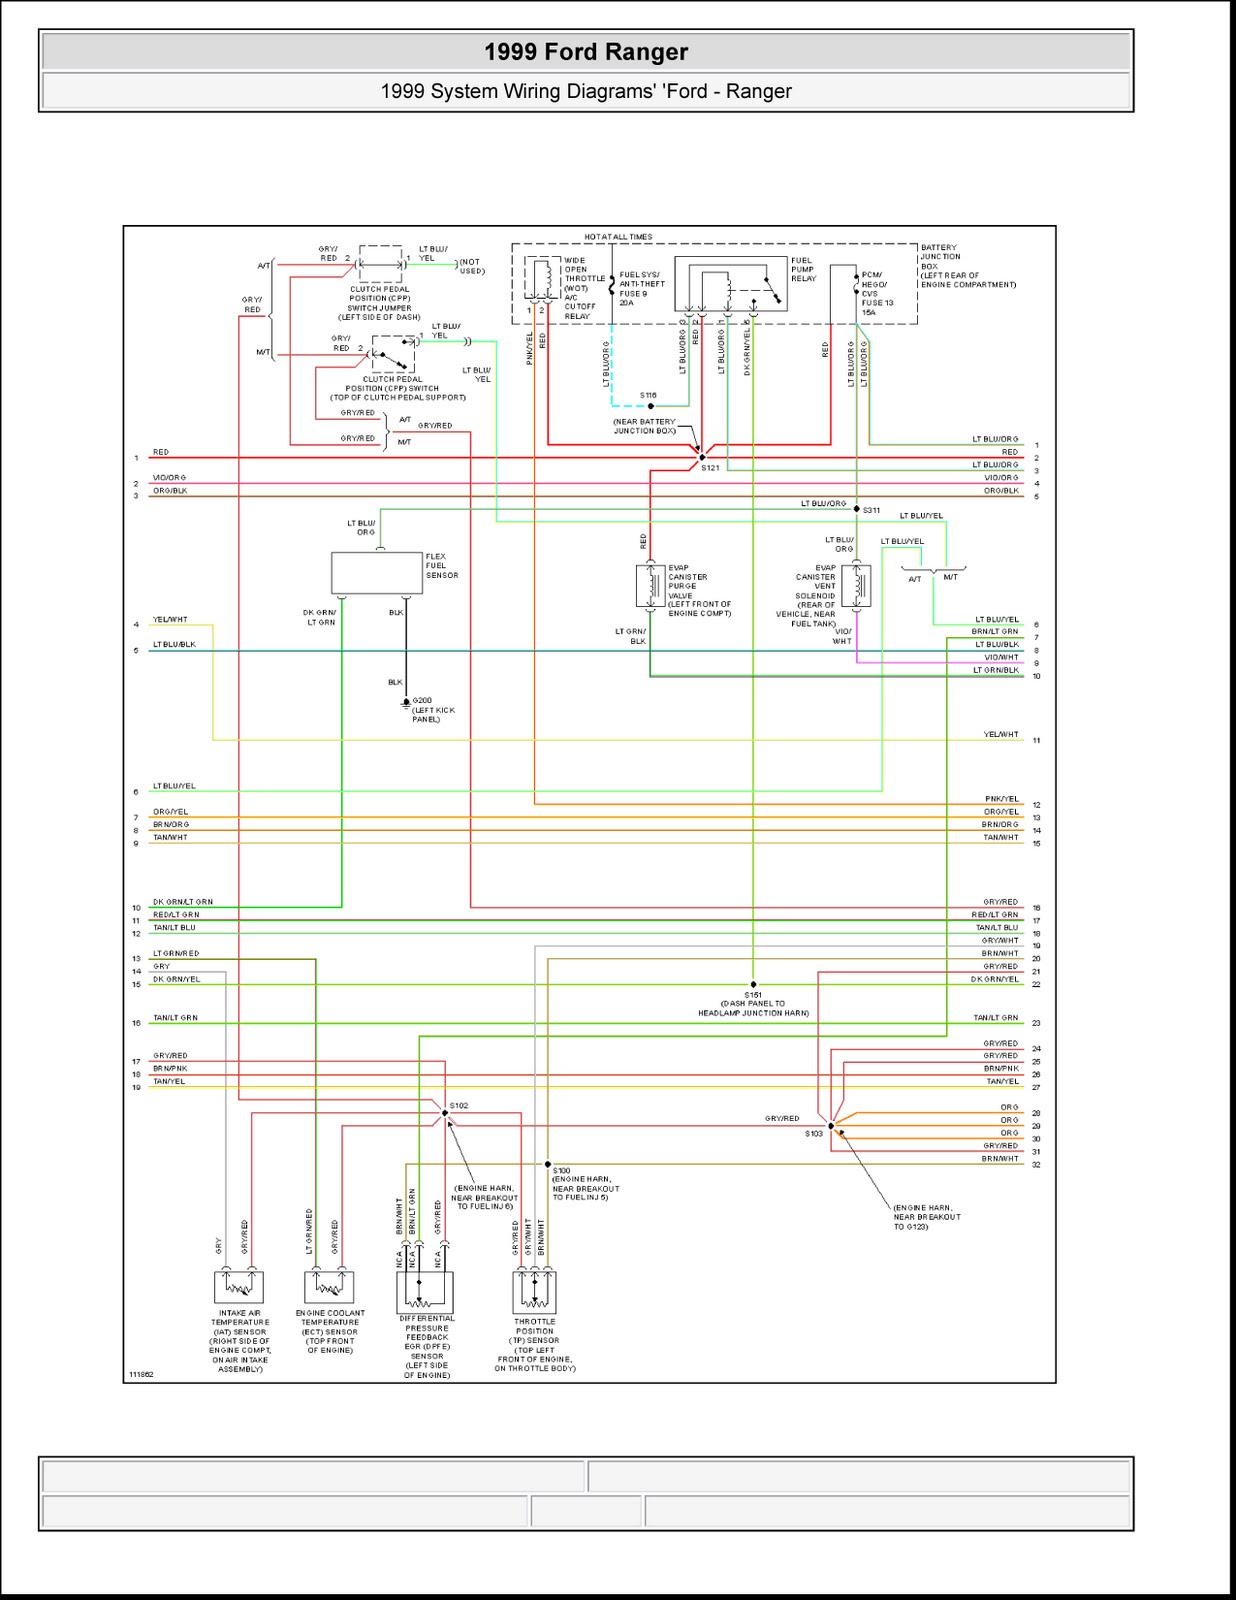 1999 Ford Ranger System Wiring Diagrams | 4 Images ...